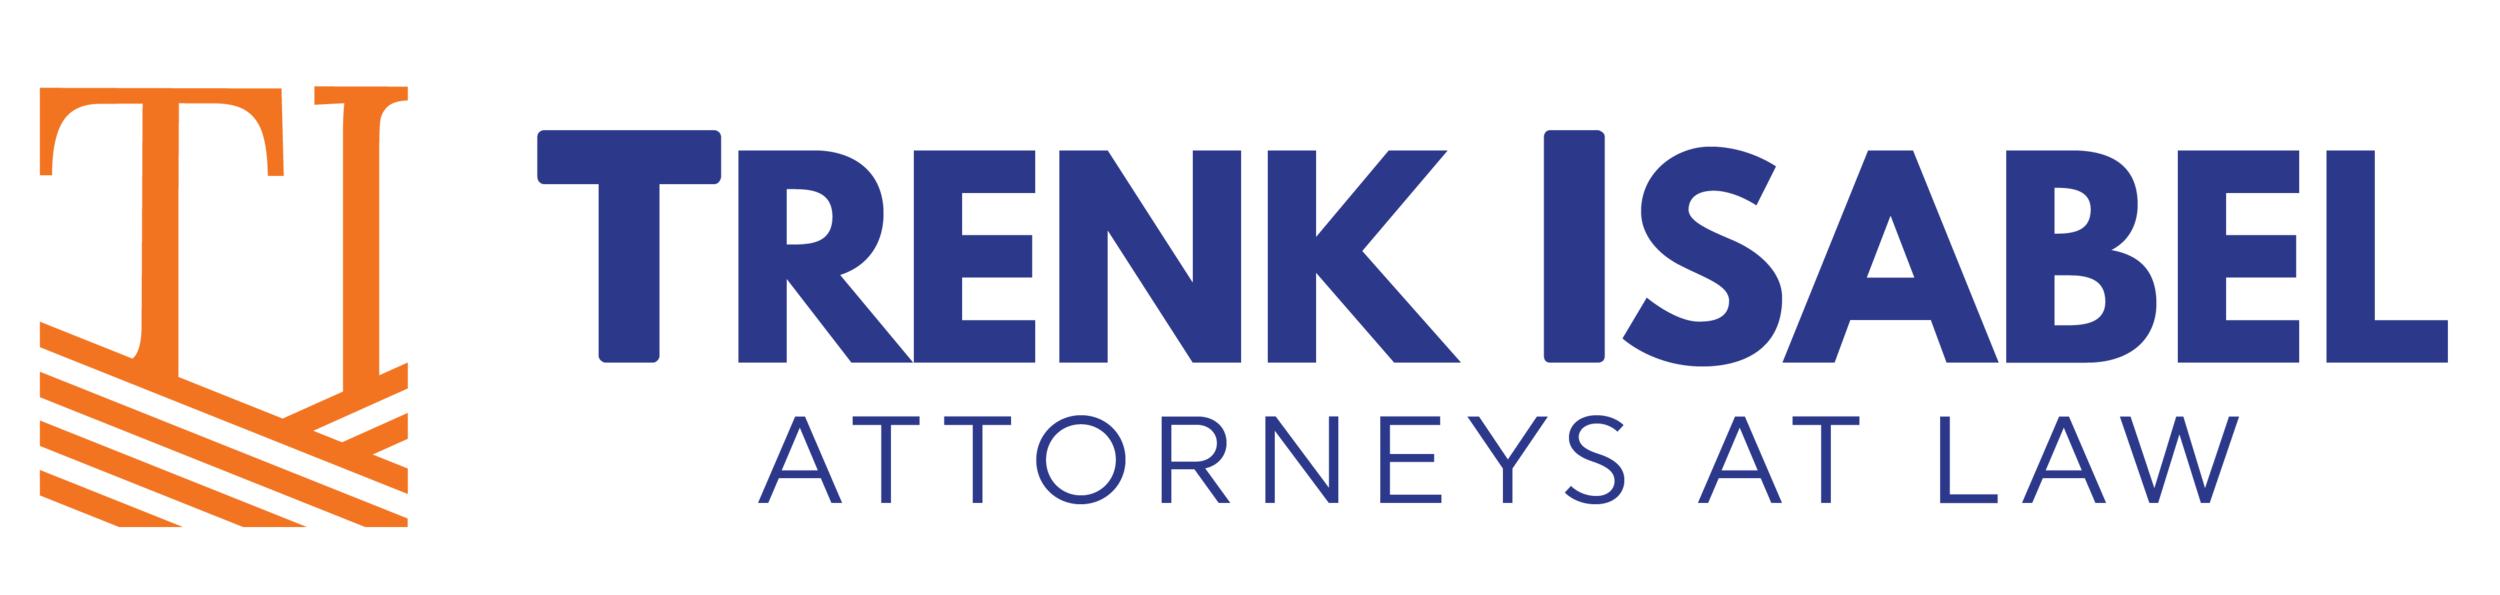 The Best Lawyers in America® selects Richard Trenk to 2021 listing for  Municipal Law; Bankruptcy & Creditor Rights/Insolvency & Reorganization Law  — Trenk Isabel Attorneys at Law